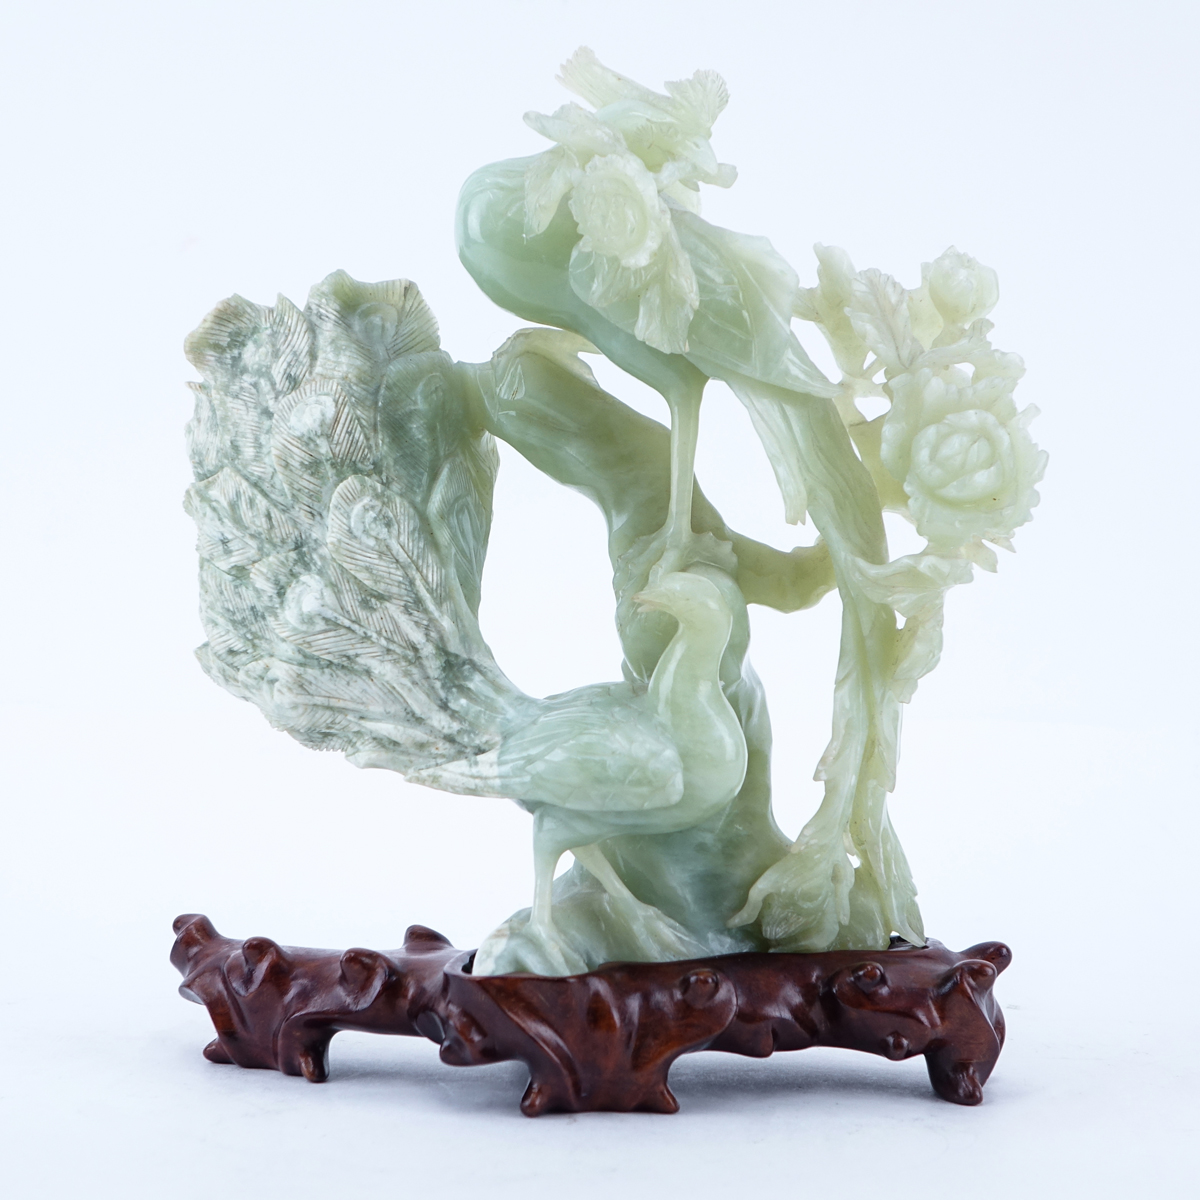 Chinese Carved Serpentine Jade Bird Group on Wooden Stand. Good condition.